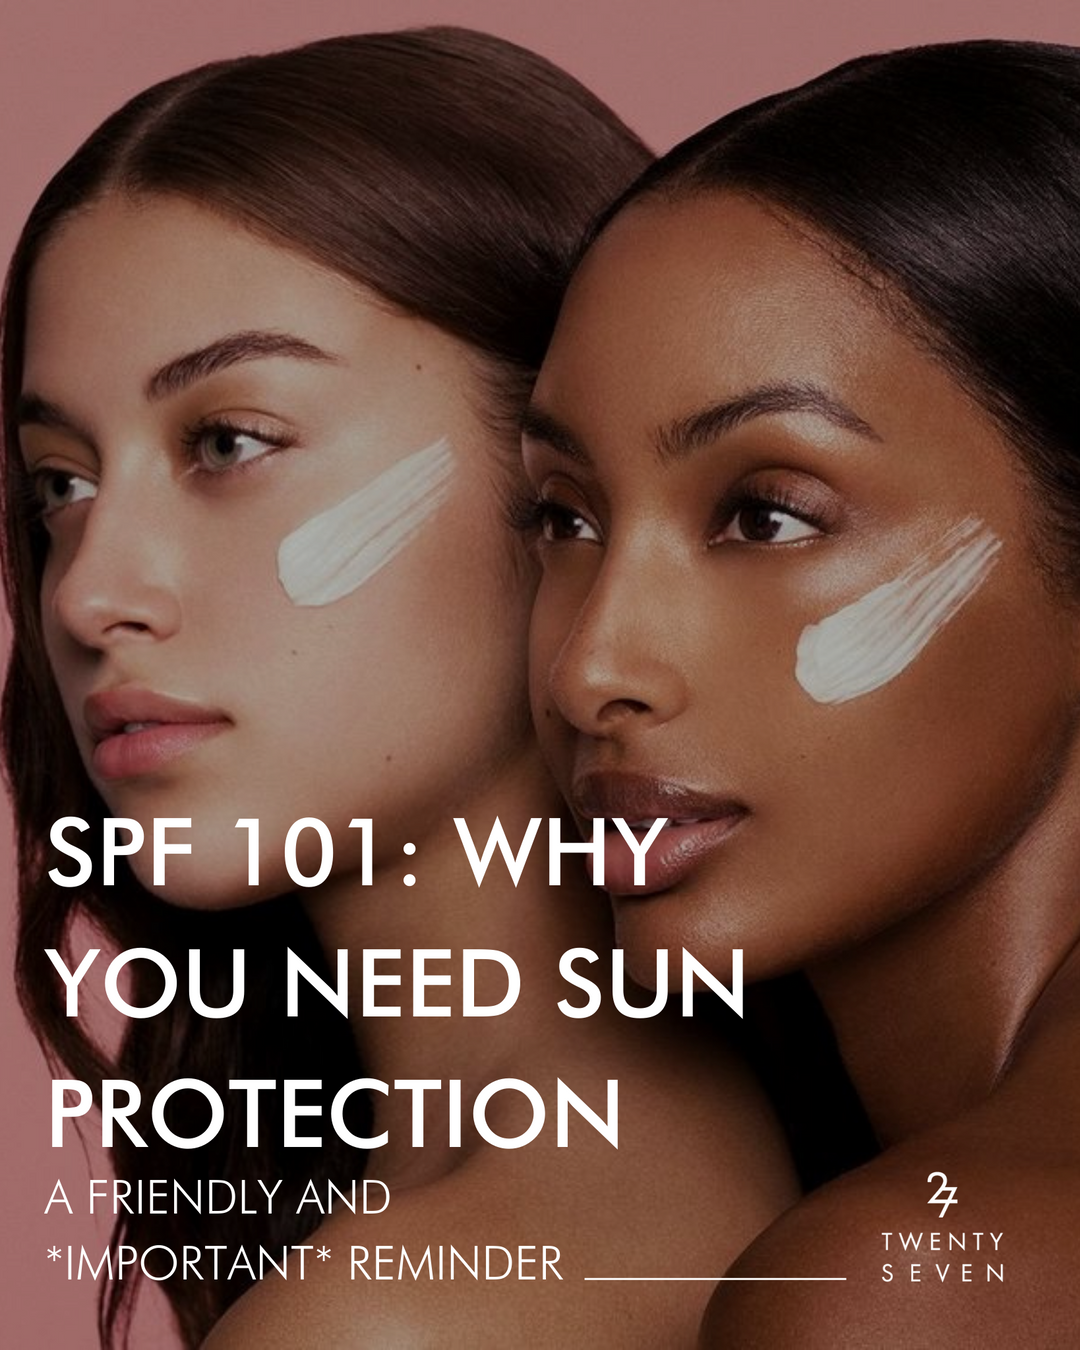 SPF 101: Why You Need Sun Protection